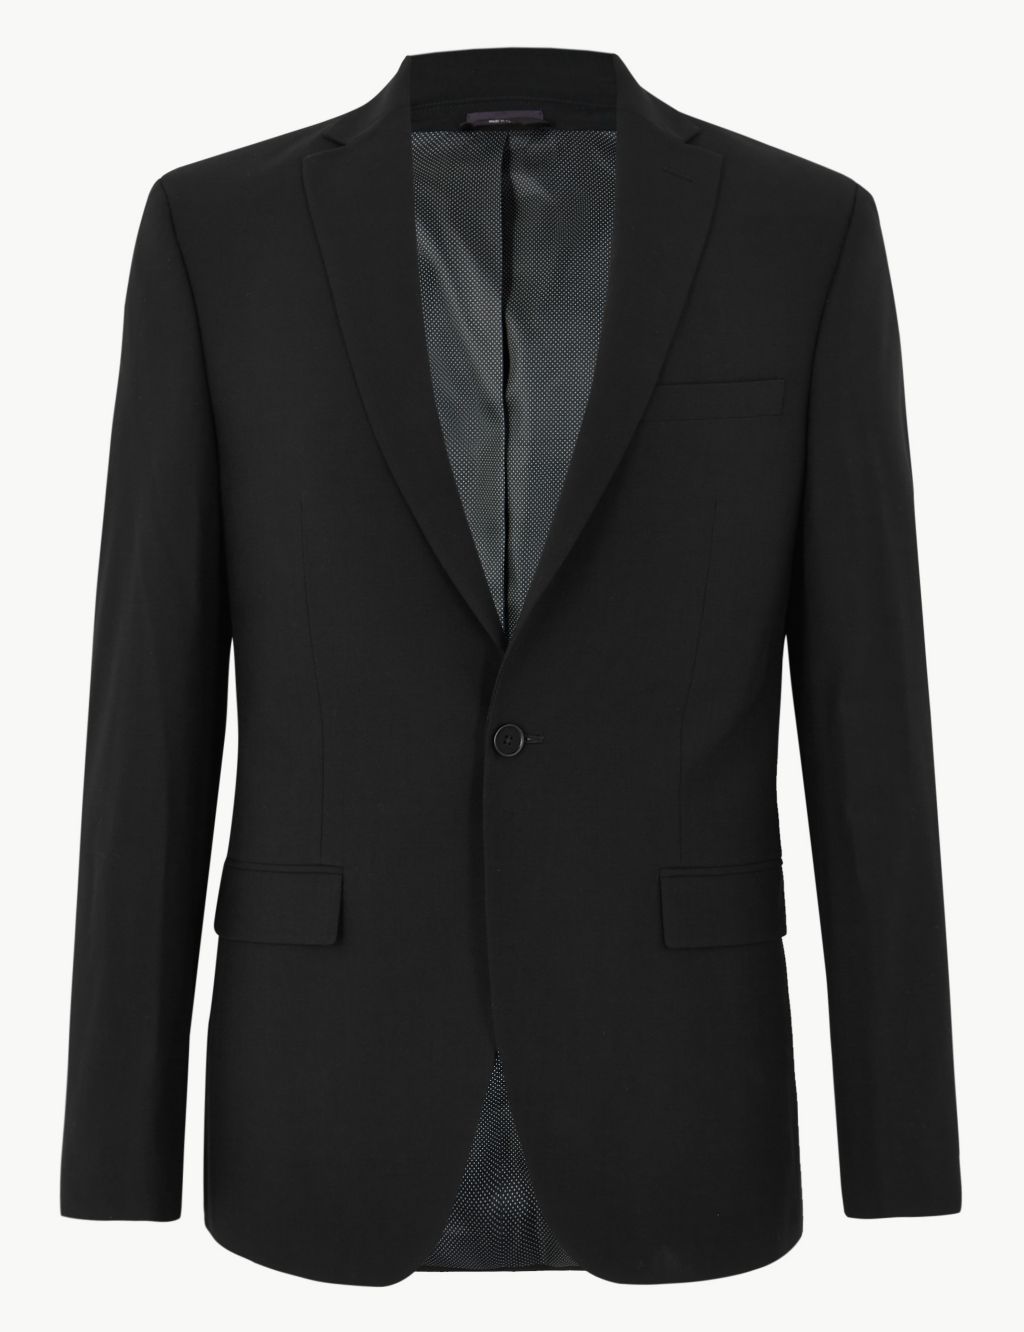 The Ultimate Black Regular Fit Jacket | M&S Collection | M&S